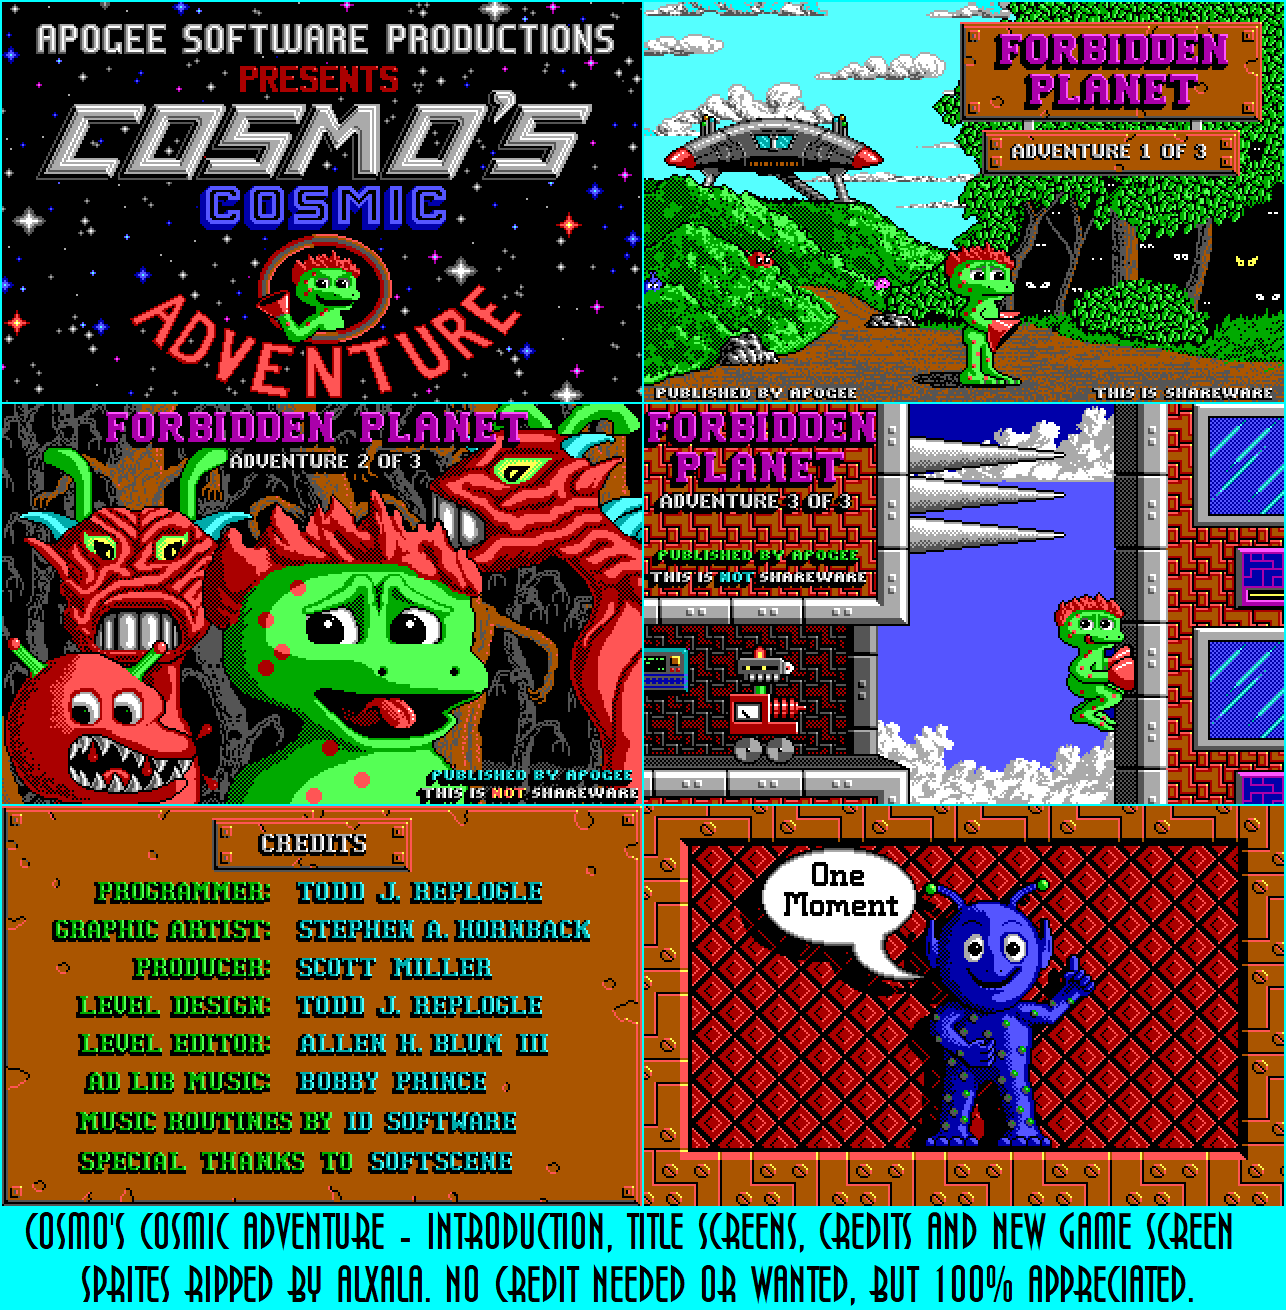 Cosmo's Cosmic Adventure - Introduction, Title Screens, Credits & New Game Screen